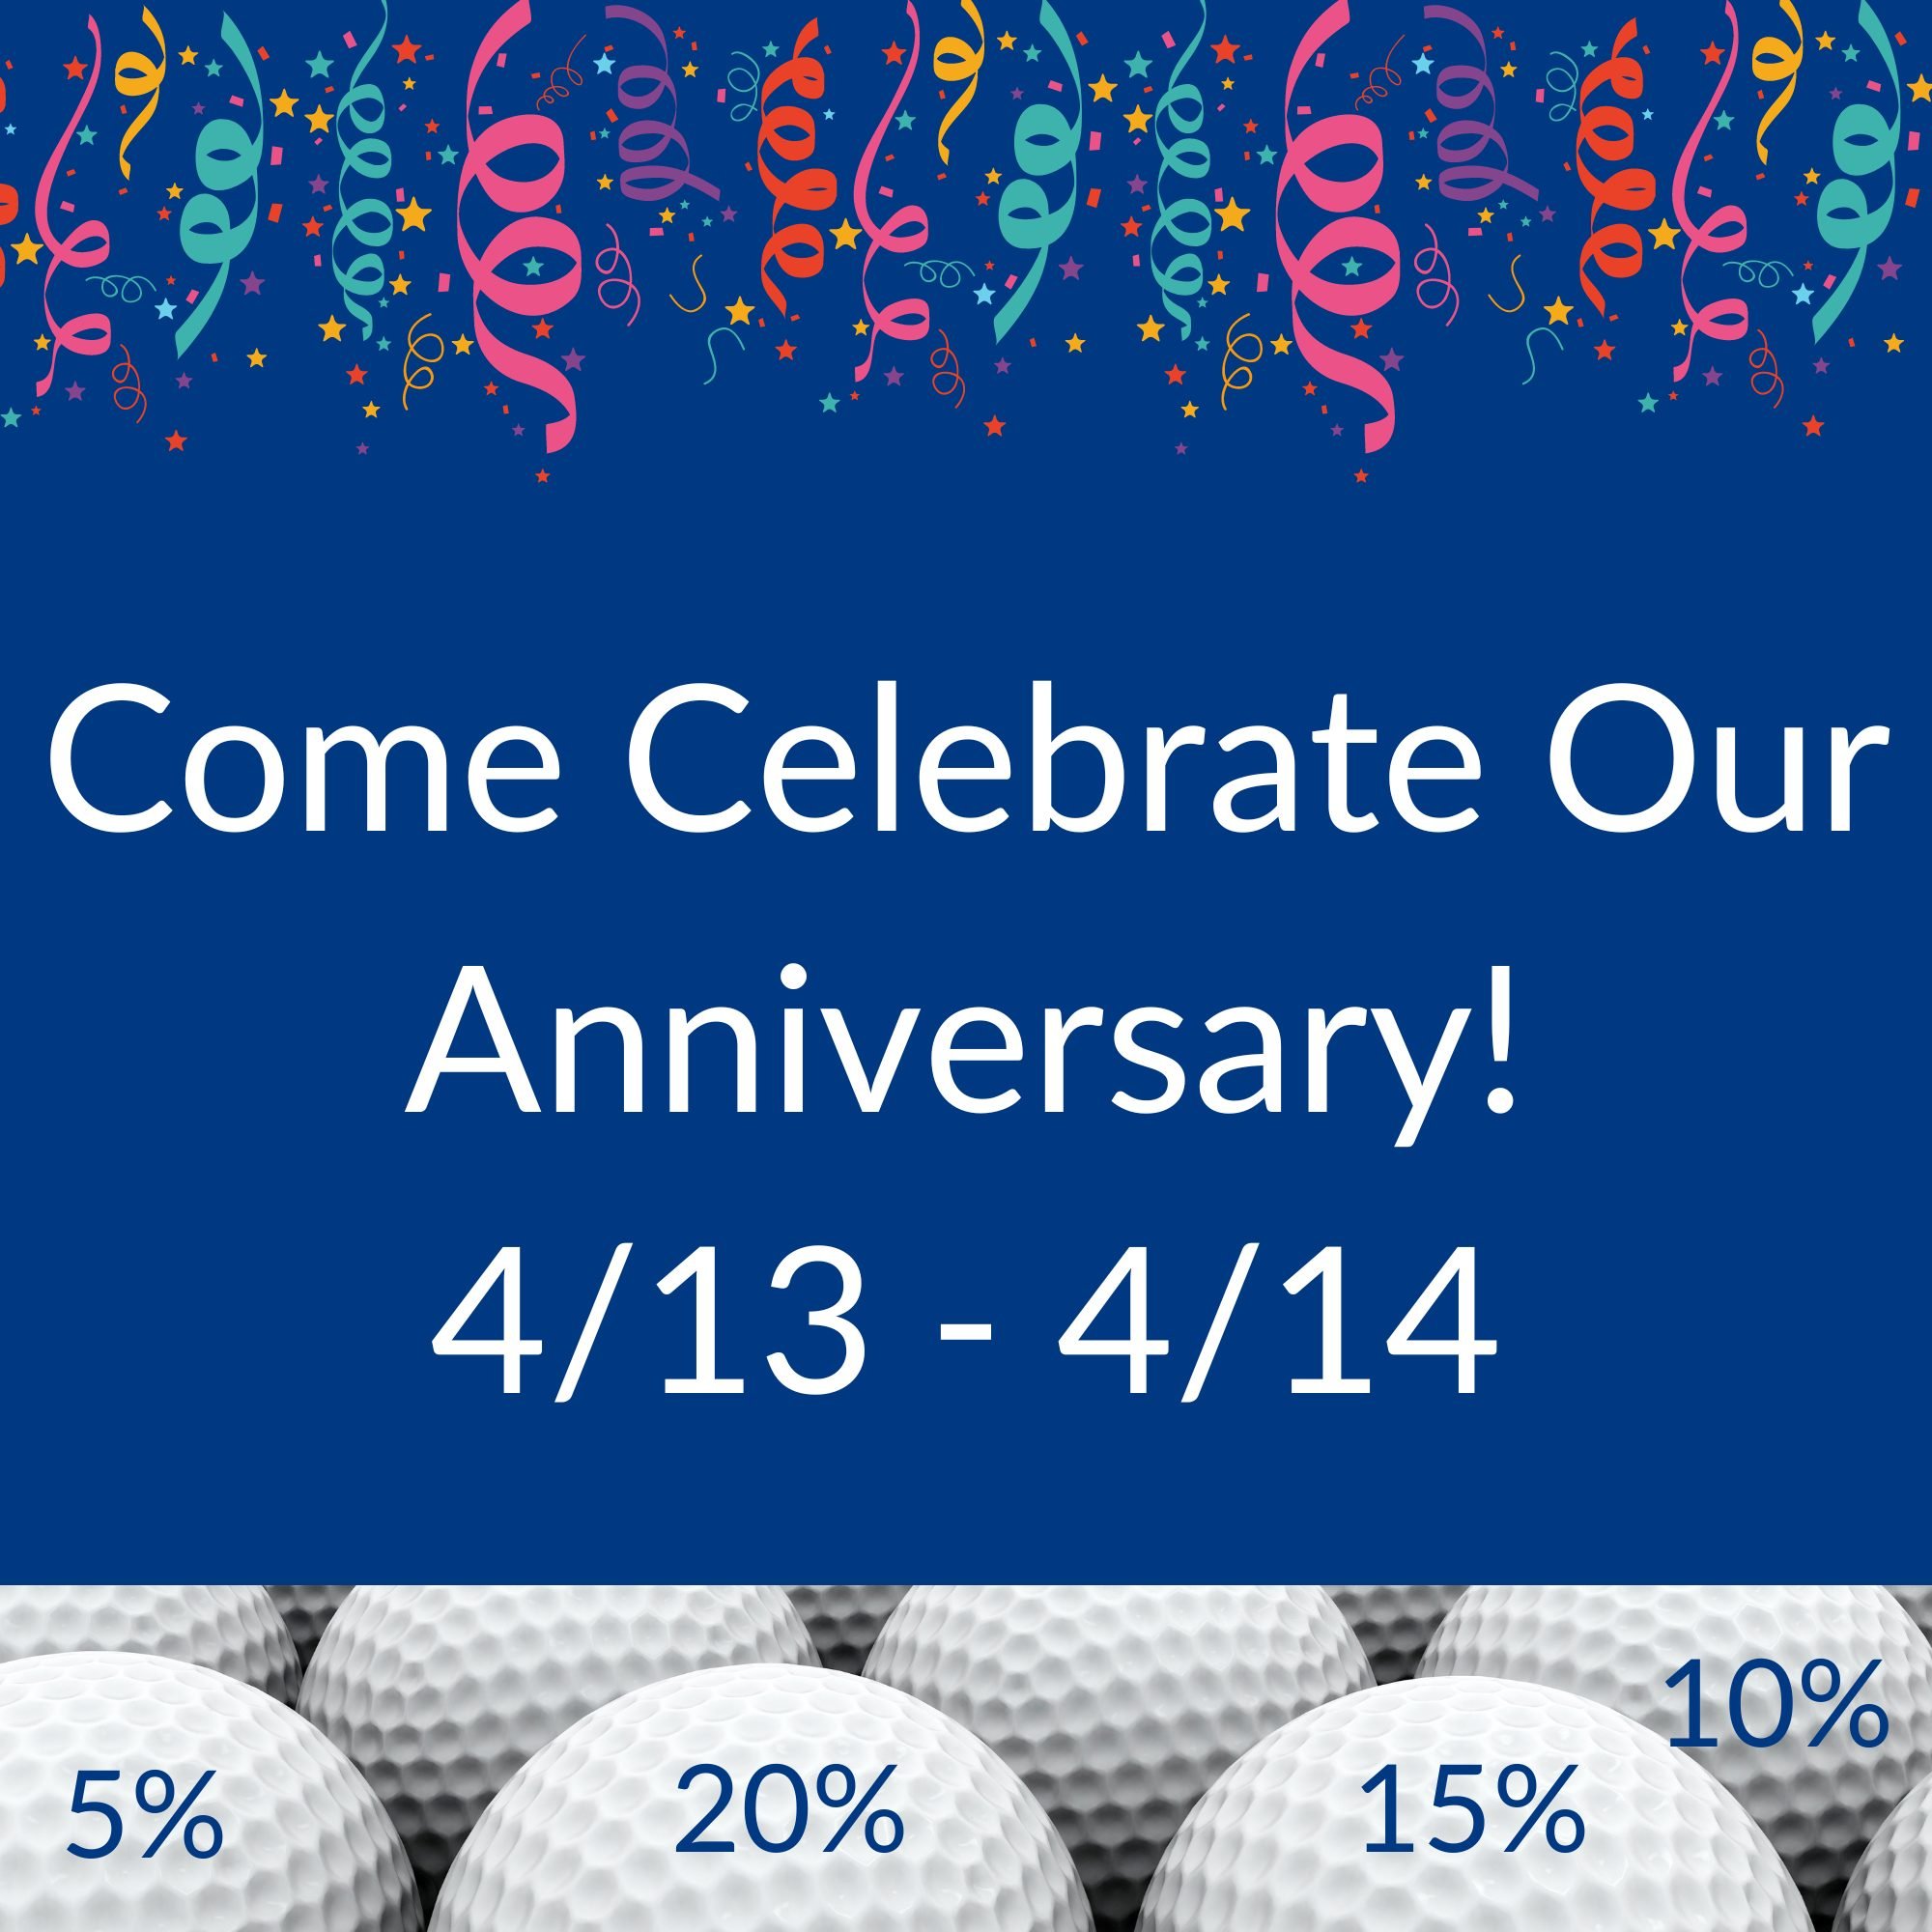 It's our anniversary!  We're giving 20% off everything over $10 PLUS an additional 5-20% off with our legendary ball sale!  Saturday and Sunday only!